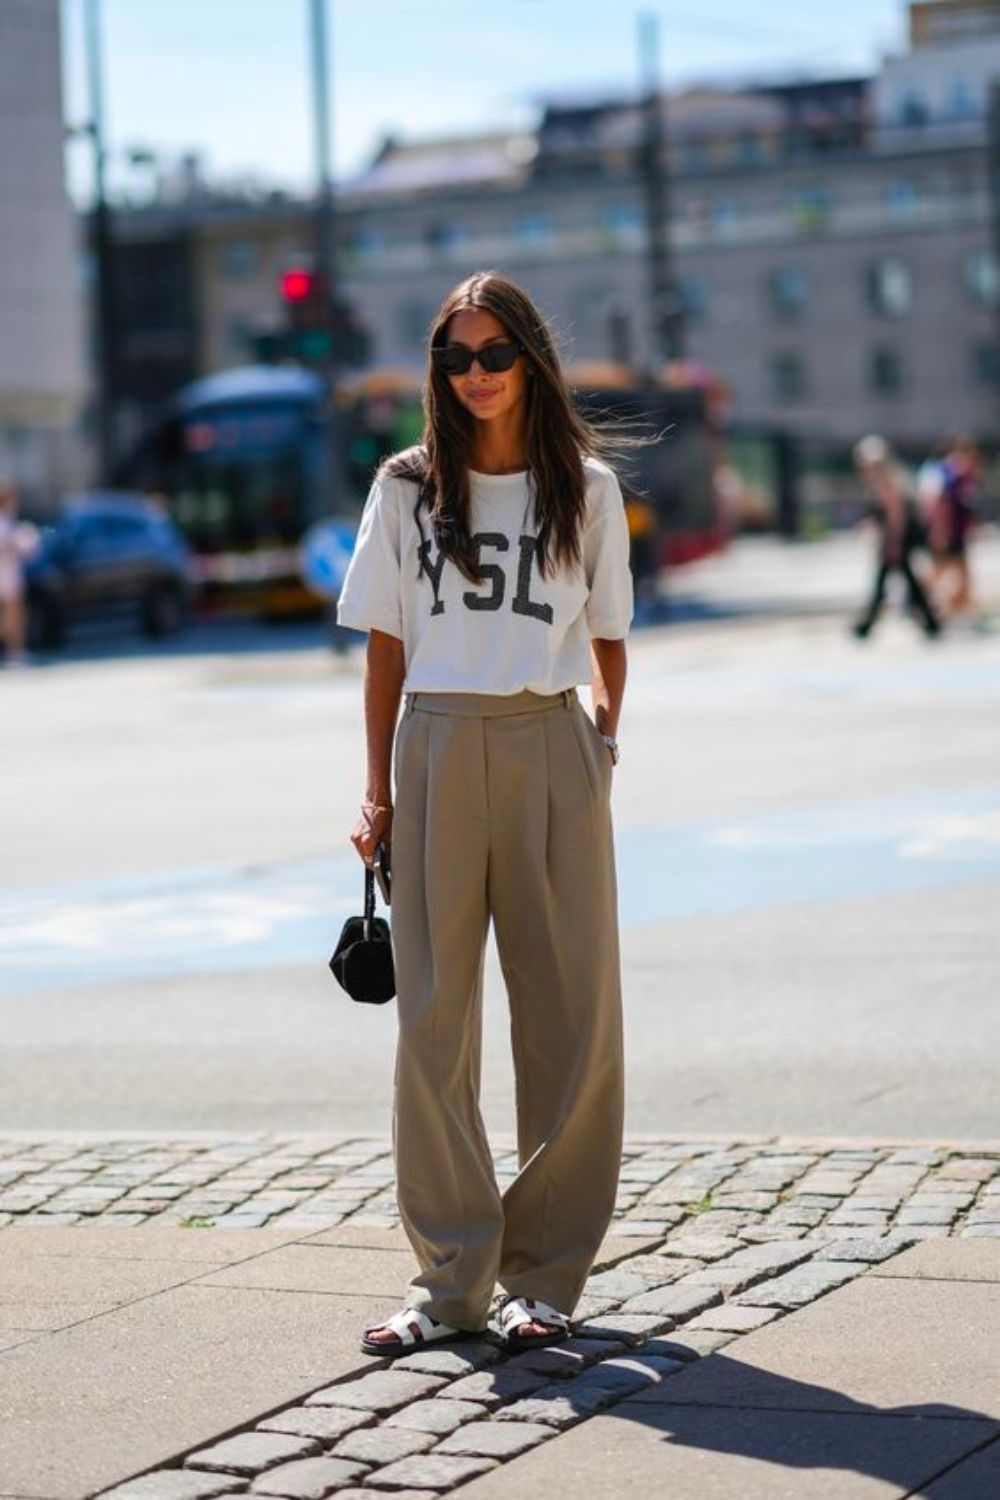 Tailored Pants for Everyday Street Style